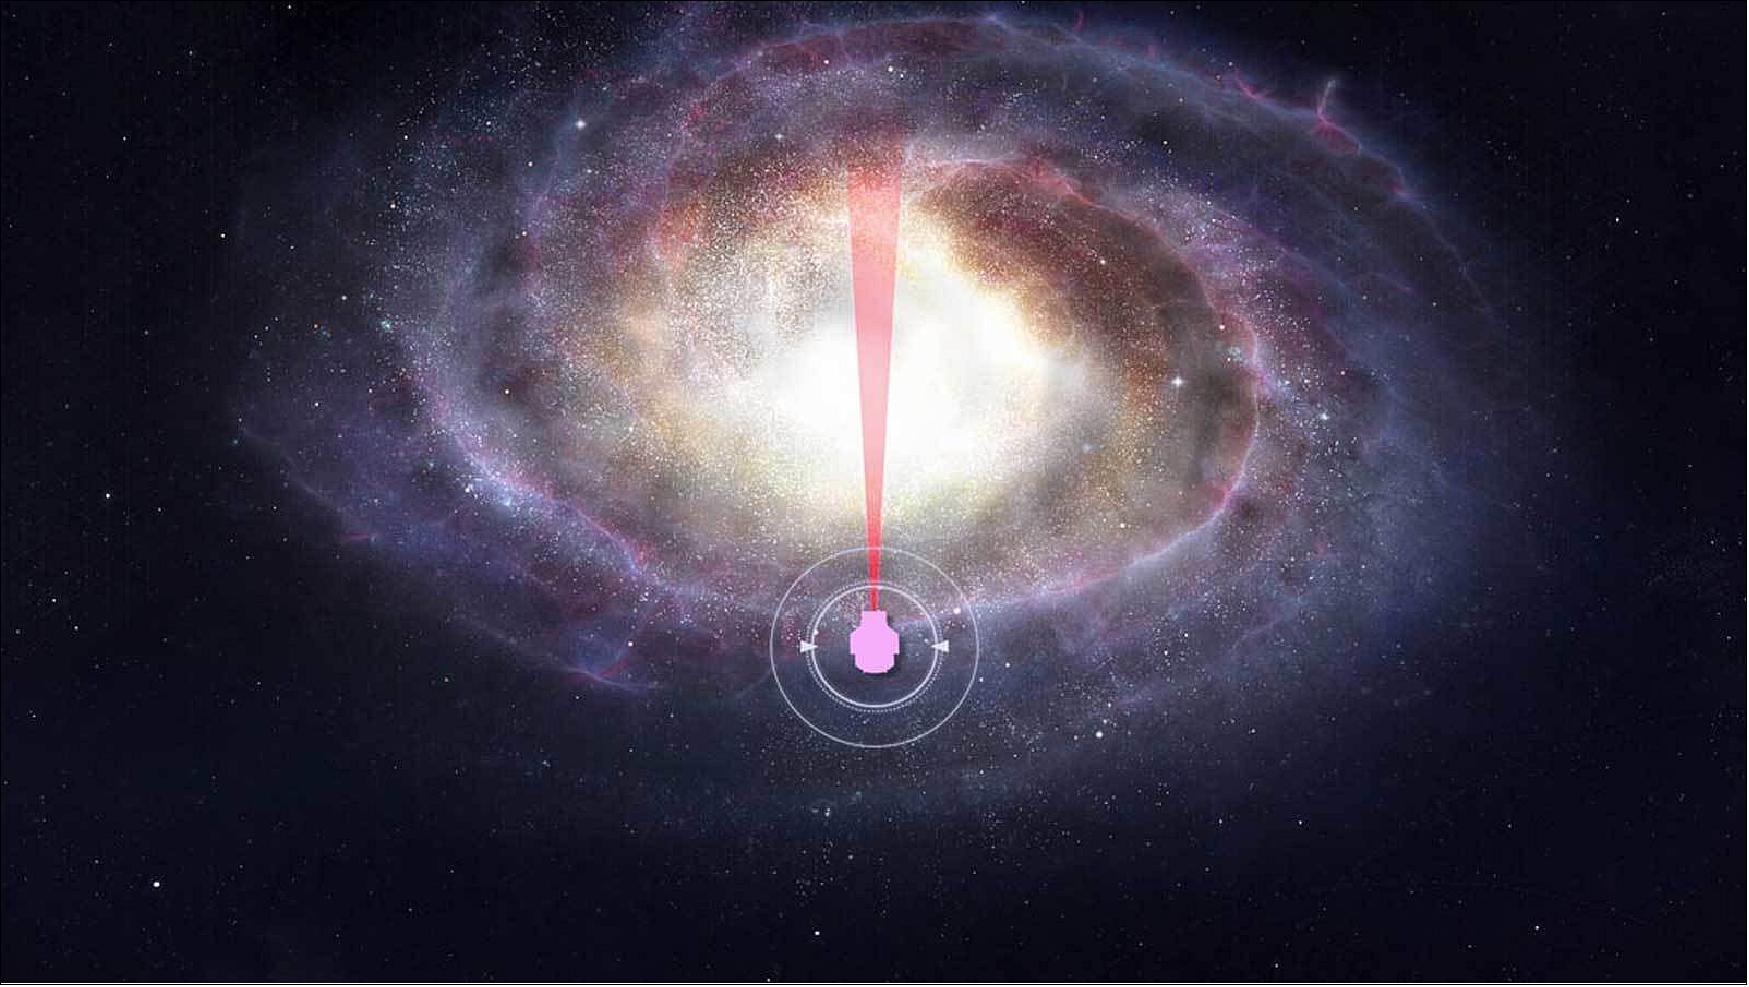 Figure 33: WFIRST will make its microlensing observations in the direction of the center of the Milky Way galaxy. The higher density of stars will yield more microlensing events, including those that reveal exoplanets (image credit: NASA's Goddard Space Flight Center/CI Lab)